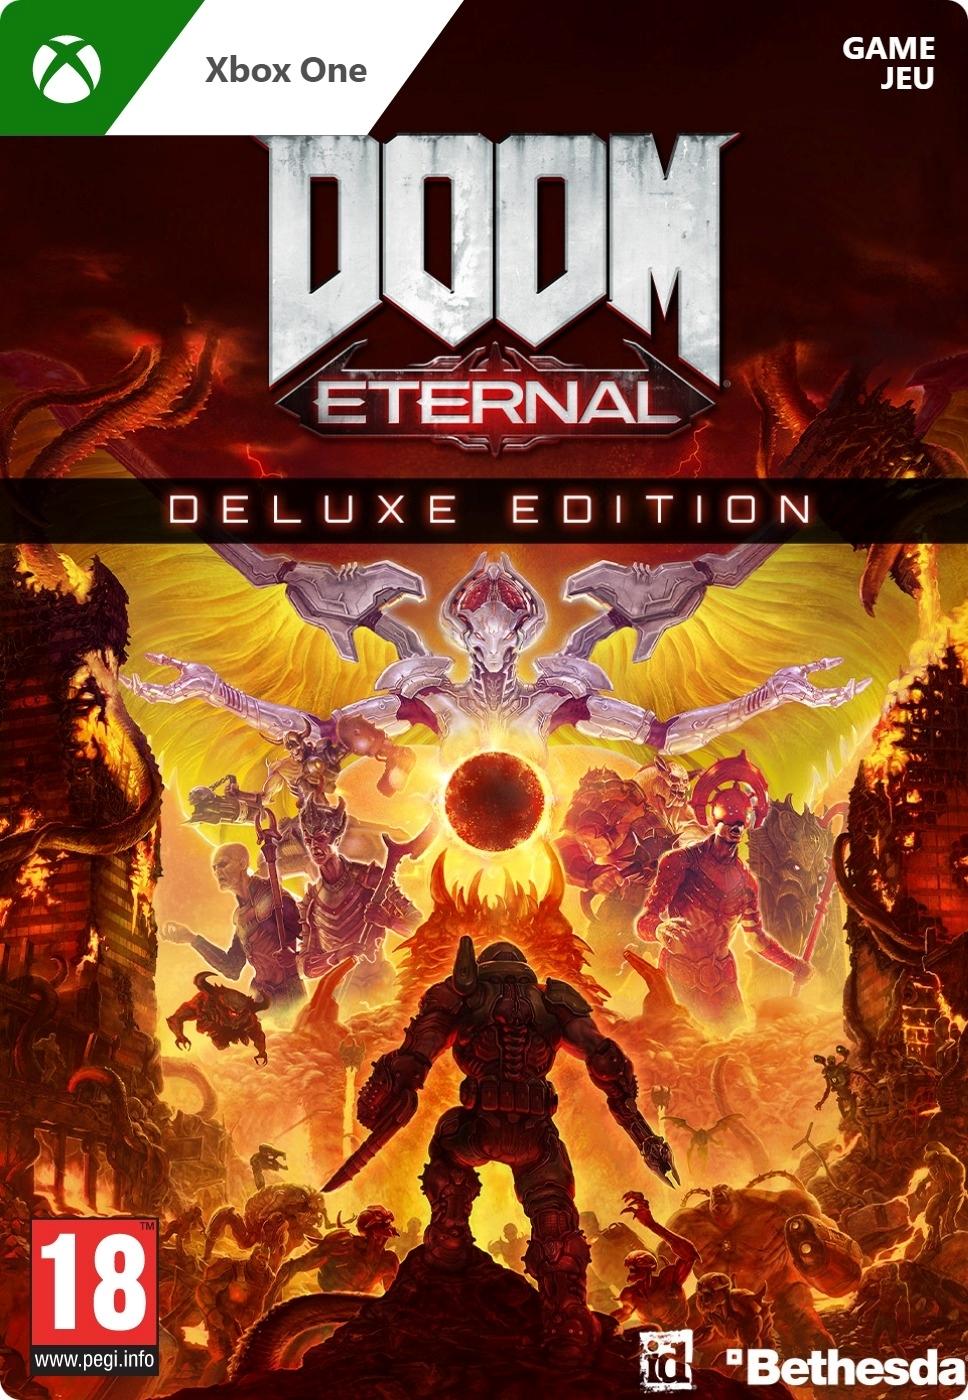 Doom Eternal: Deluxe Edition - Xbox One - Game | G7Q-00159 (9f74819b-c8d7-9a49-97c7-9ad5e57b8c5a)